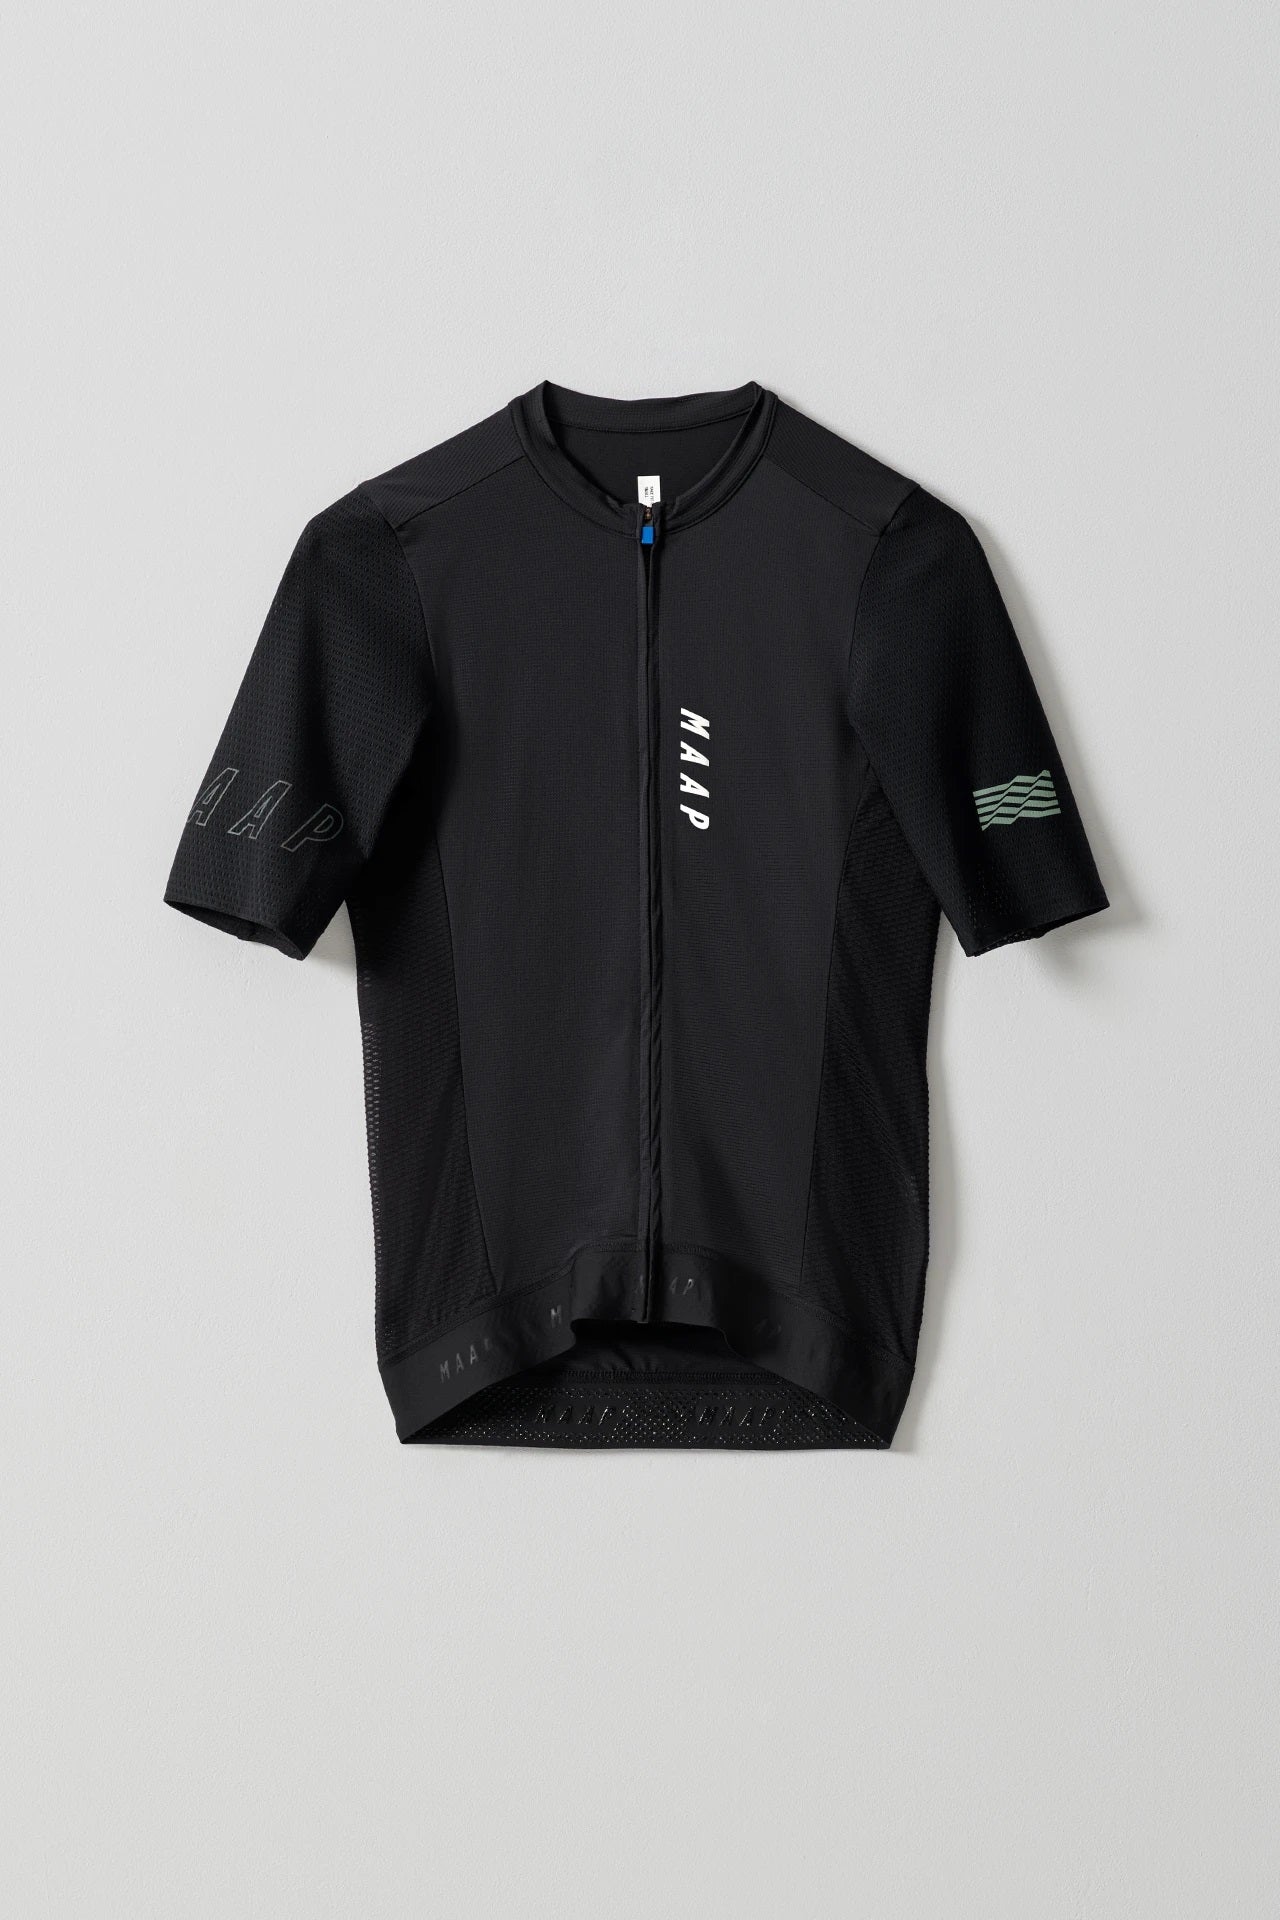 Jersey Manches Courtes MAAP Stealth Race Fit